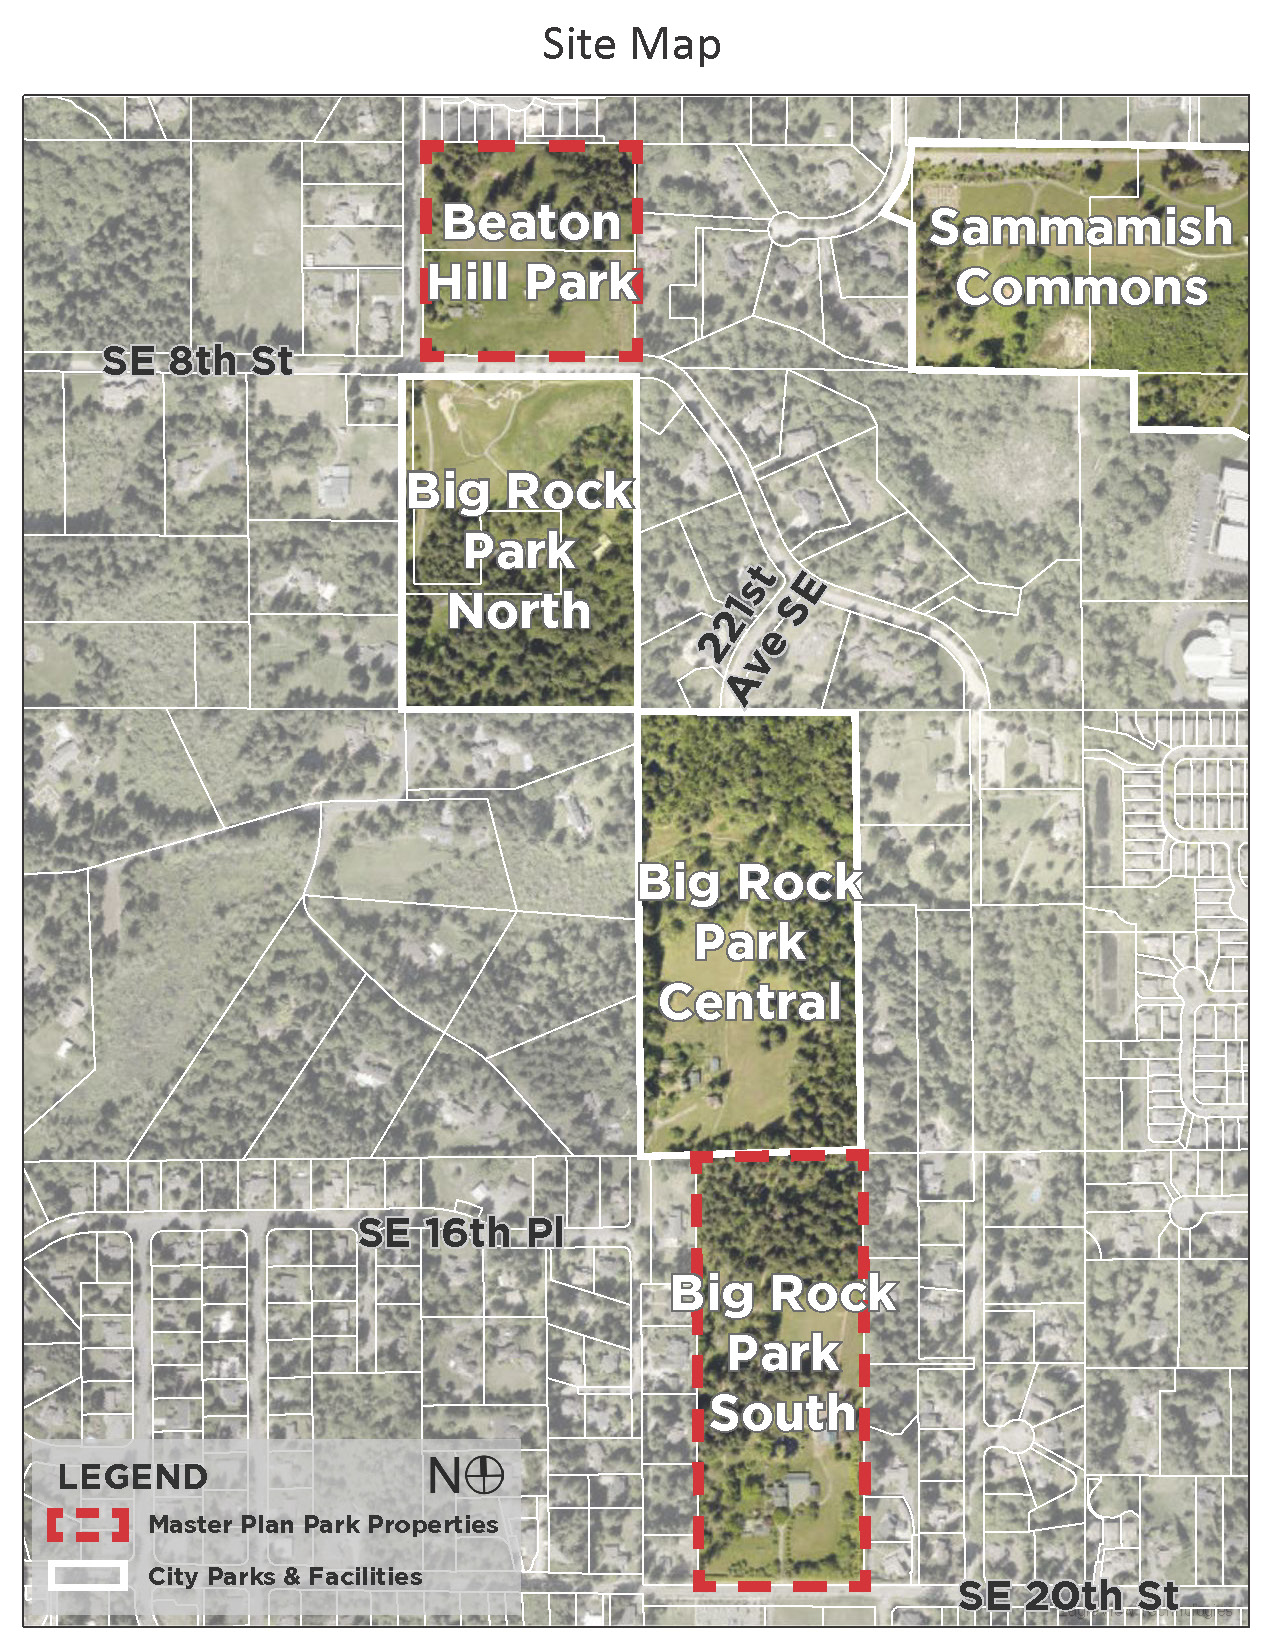 Site map showing where Beaton Hill Park and Big Rock Park South are and their proximity to each other as well as to Big Rock Park North, Big Rock Park Central, and Sammamish Commons.